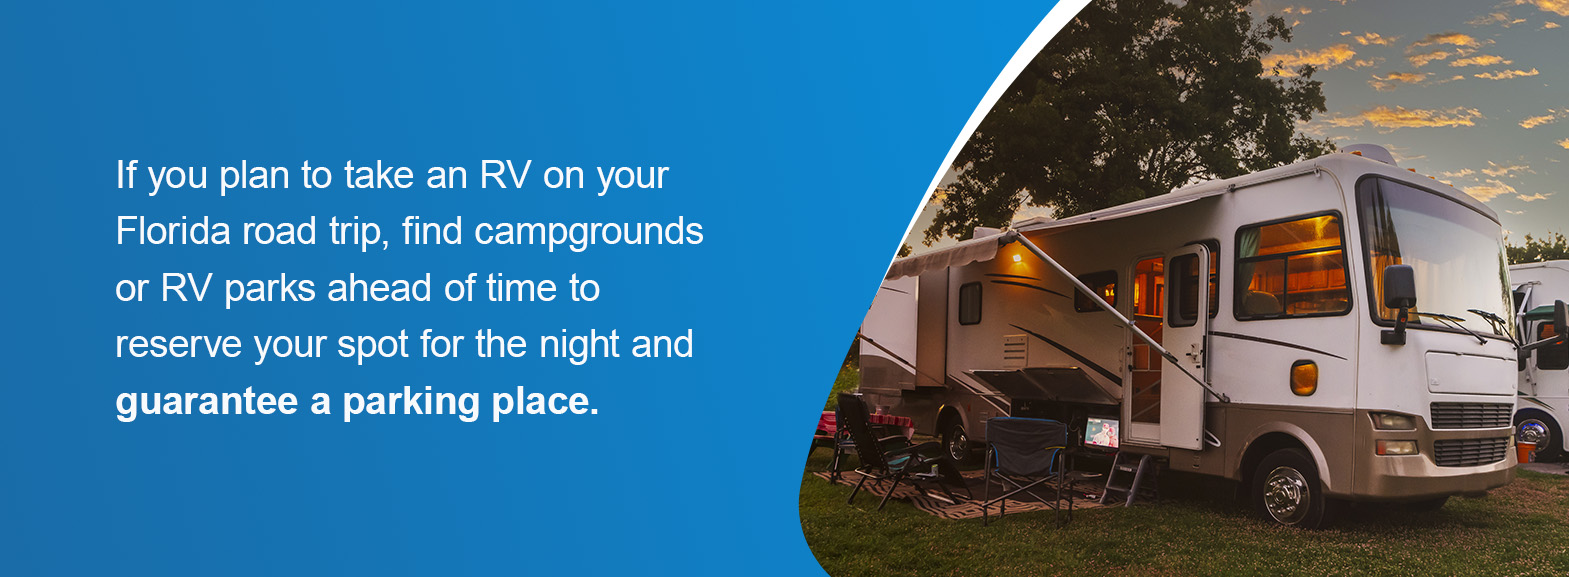 Campgrounds -  If you plan to take an RV on your Florida road trip, find campgrounds or RV parks ahead of time to reserve your spot for the night and guarantee a parking place.